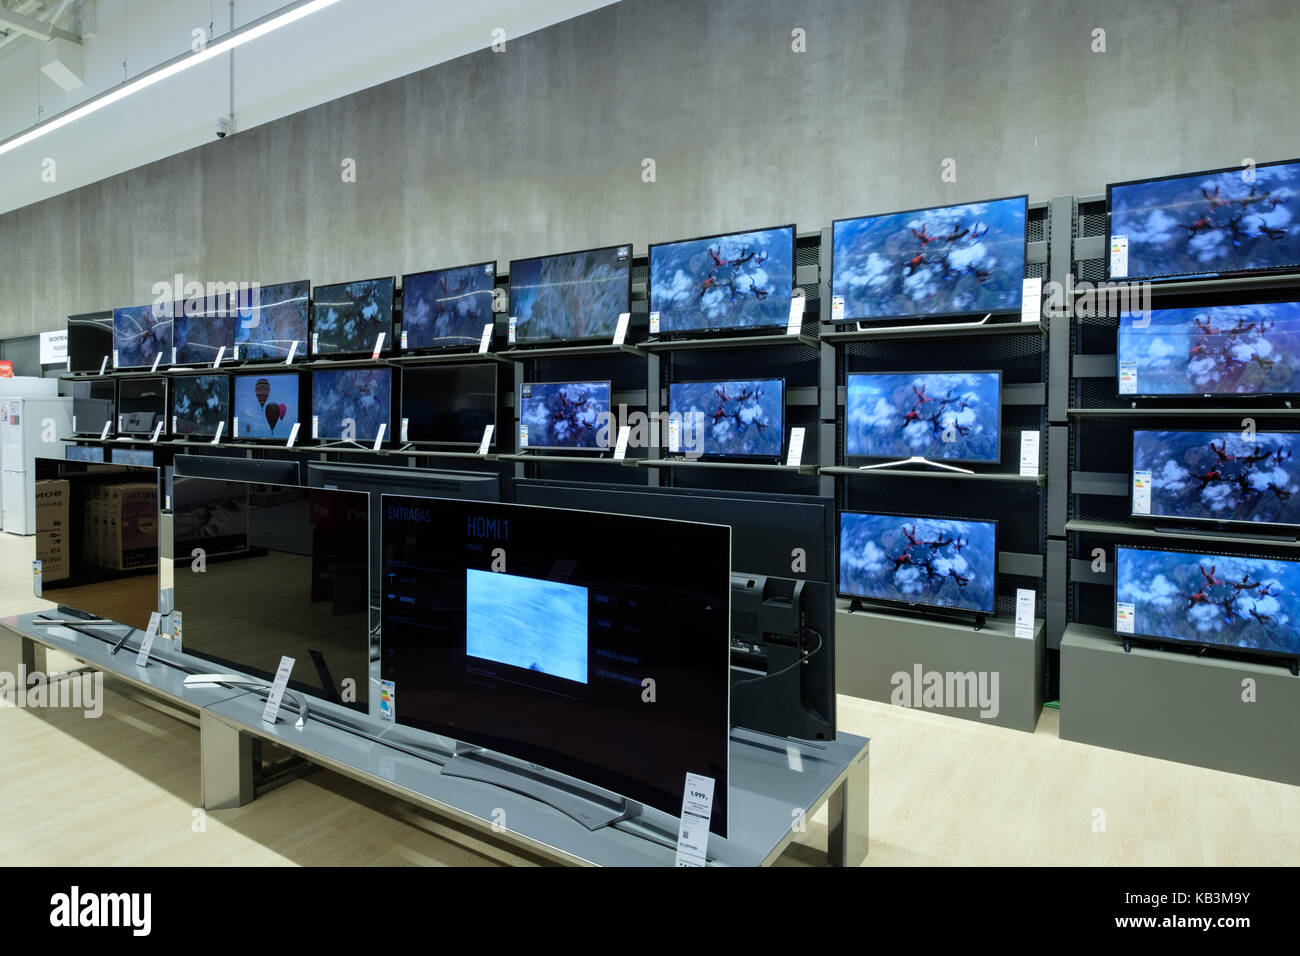 Flat screen televisions at an electronics store Stock Photo